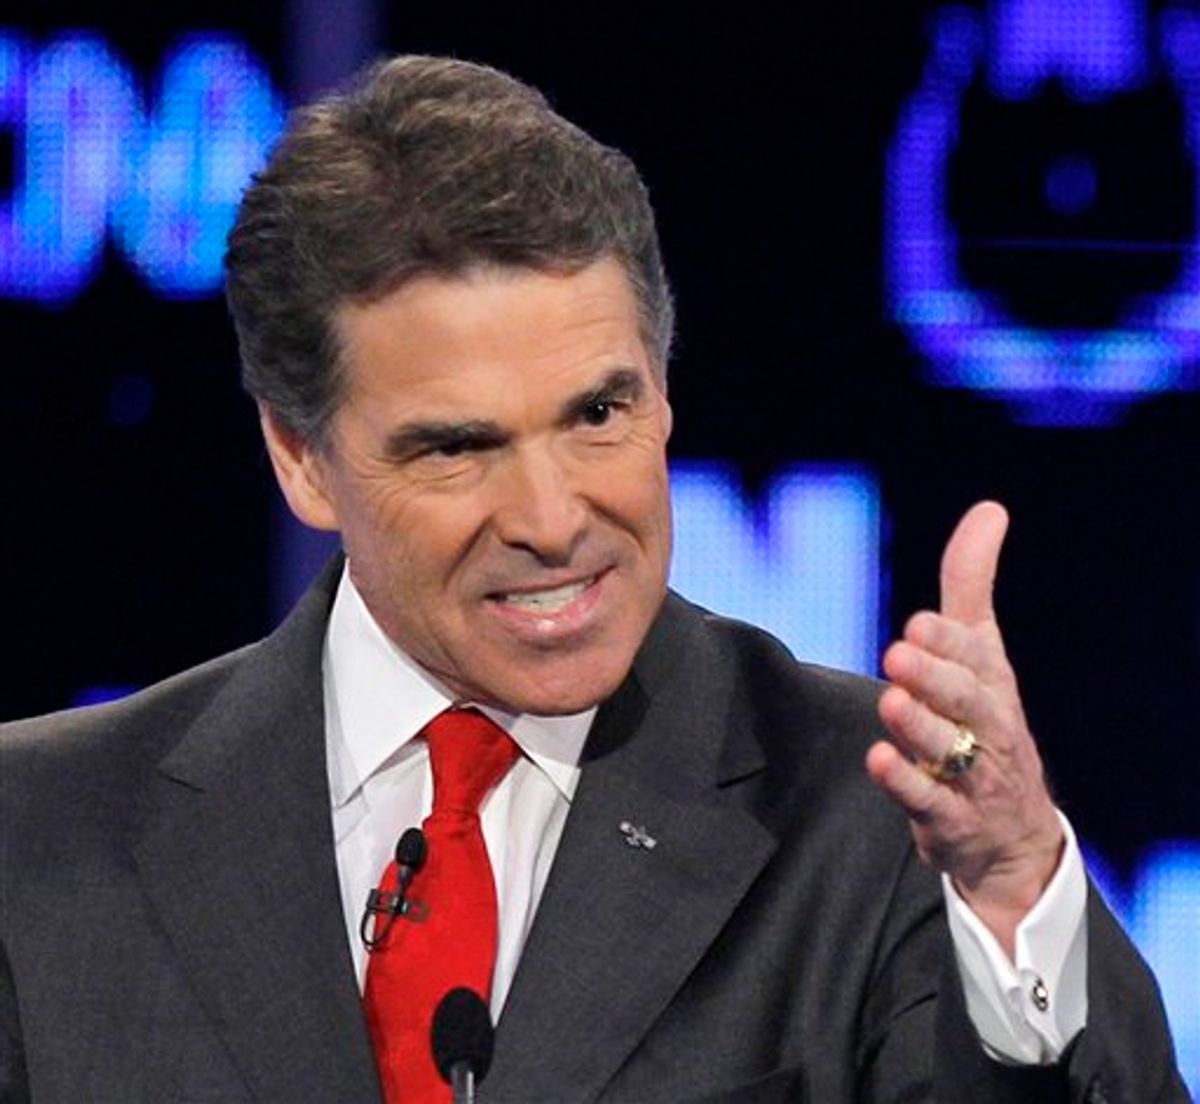 FILE - In this Oct. 18, 2011 file photo, Republican presidential candidate Texas Gov. Rick Perry makes a point during a Republican presidential debate in Las Vegas. (AP Photo/Chris Carlson, File)         (AP)